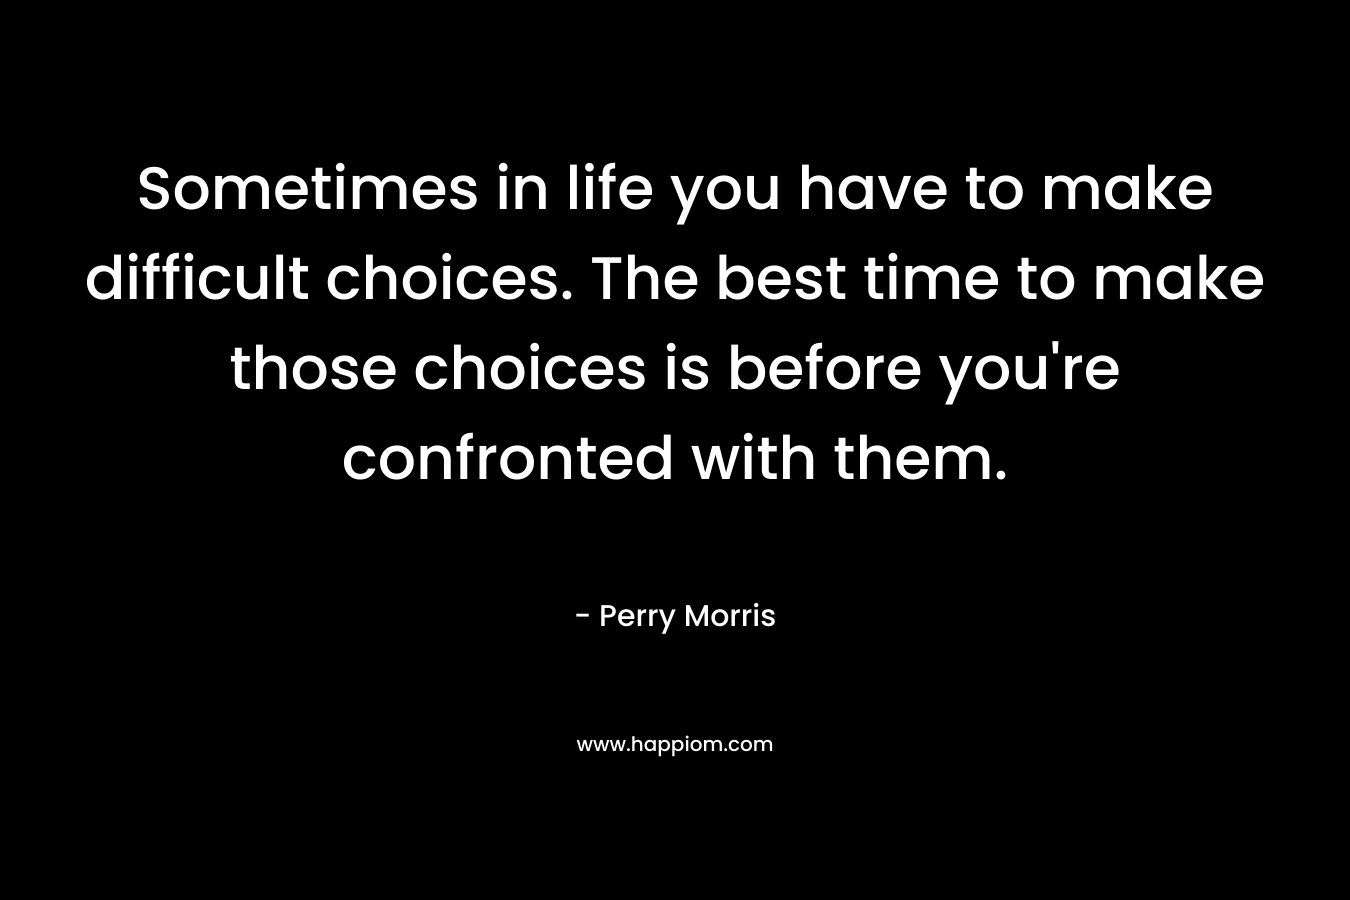 Sometimes in life you have to make difficult choices. The best time to make those choices is before you're confronted with them.